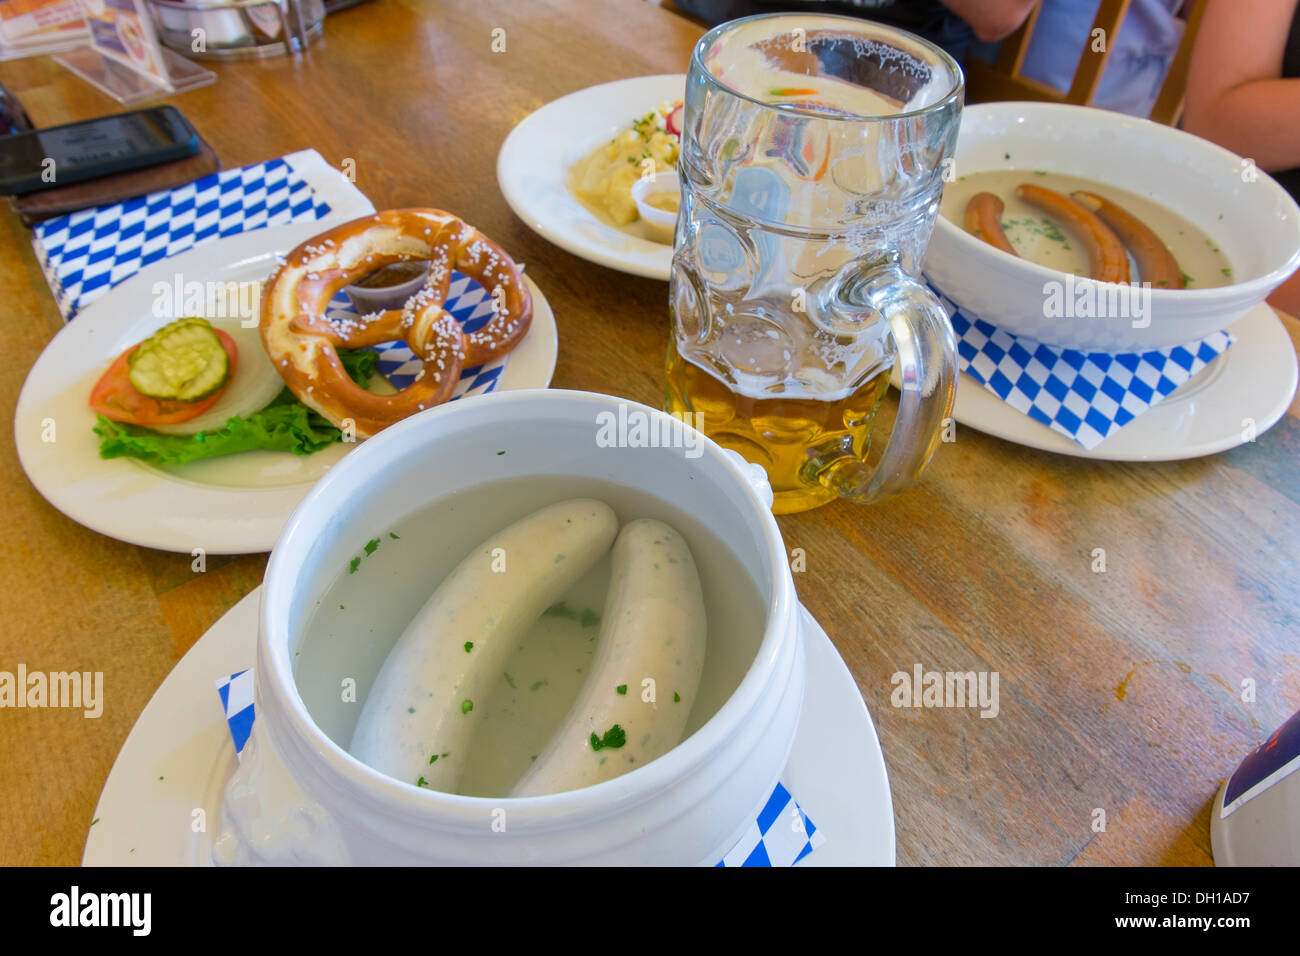 Table setting in Bavarian restaurant - Typical Bavarian dish with weisswurst, wieners, pretzel and beer mug Stock Photo